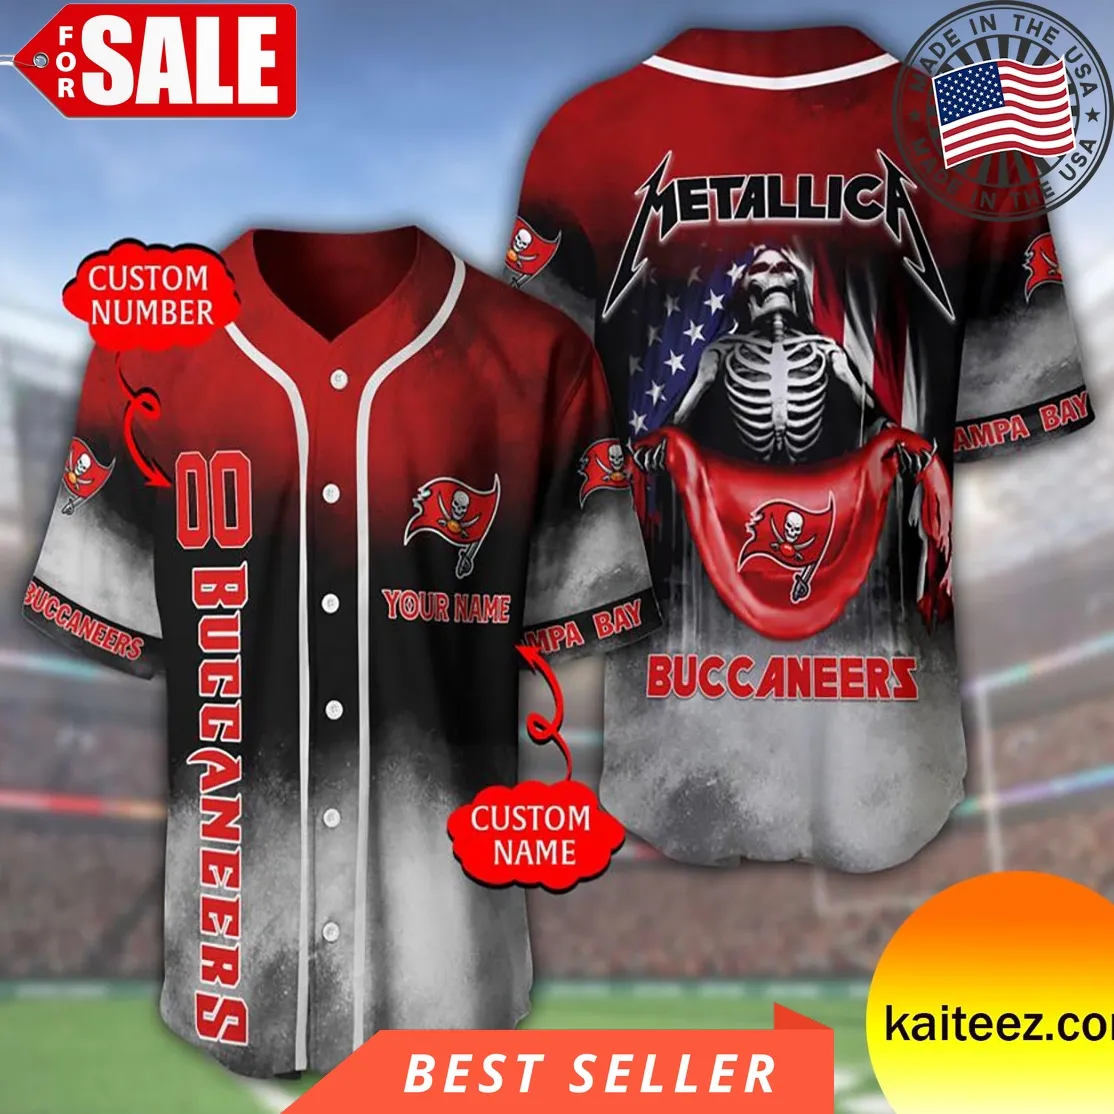 Custom Name And Number Metallica Band Tampa Bay Buccaneers Nfl Flag America Baseball Jersey Size up S to 5XL Sunflower